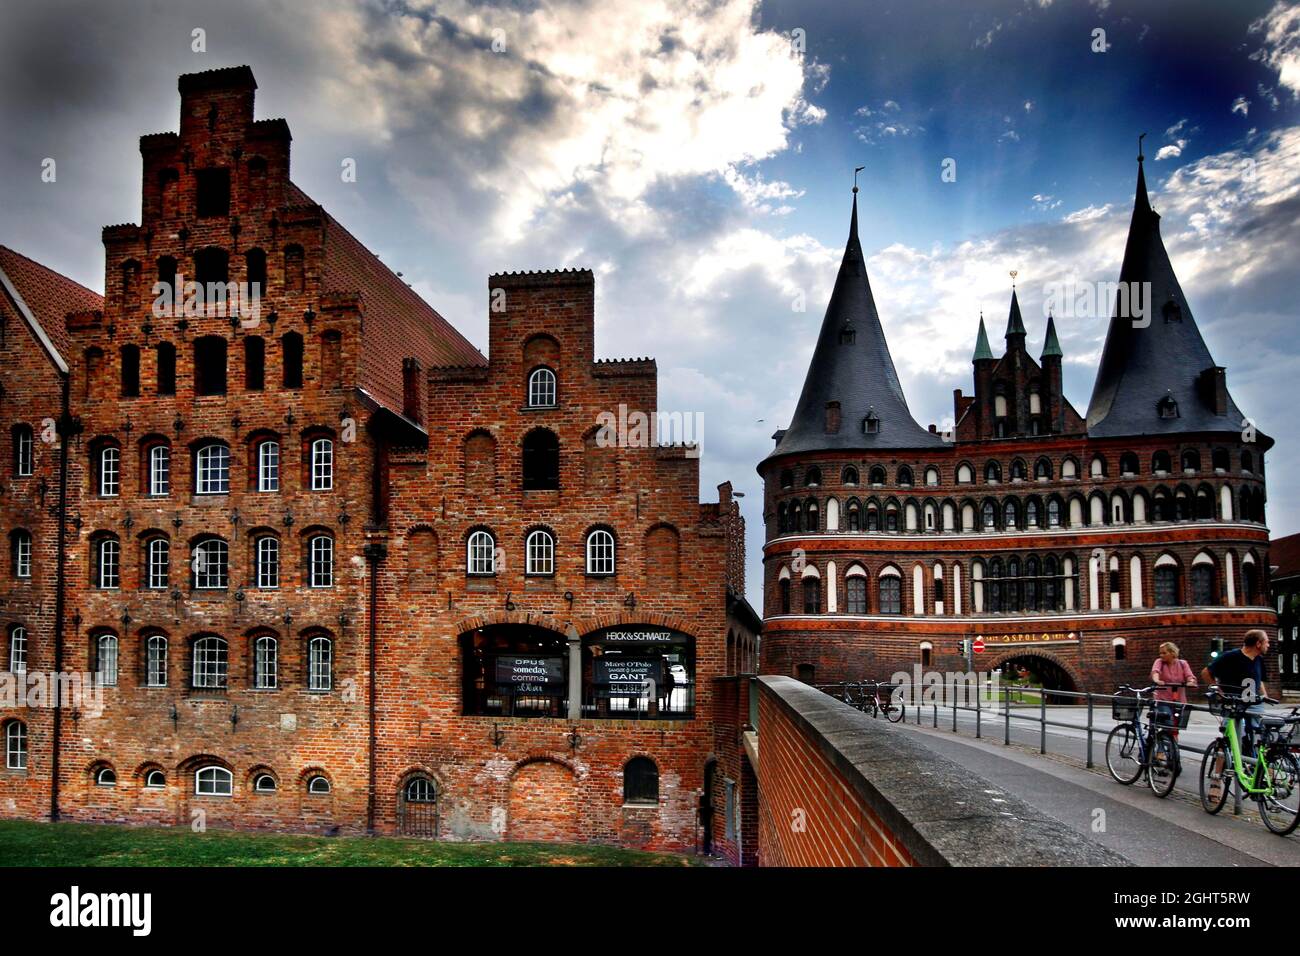 Brick Gothic warehouses on the Trave, Holstentor, landmark, 50-Mark bill,  Old Town, medieval city, UNESCO World Heritage Site, Hanseatic City of  Stock Photo - Alamy